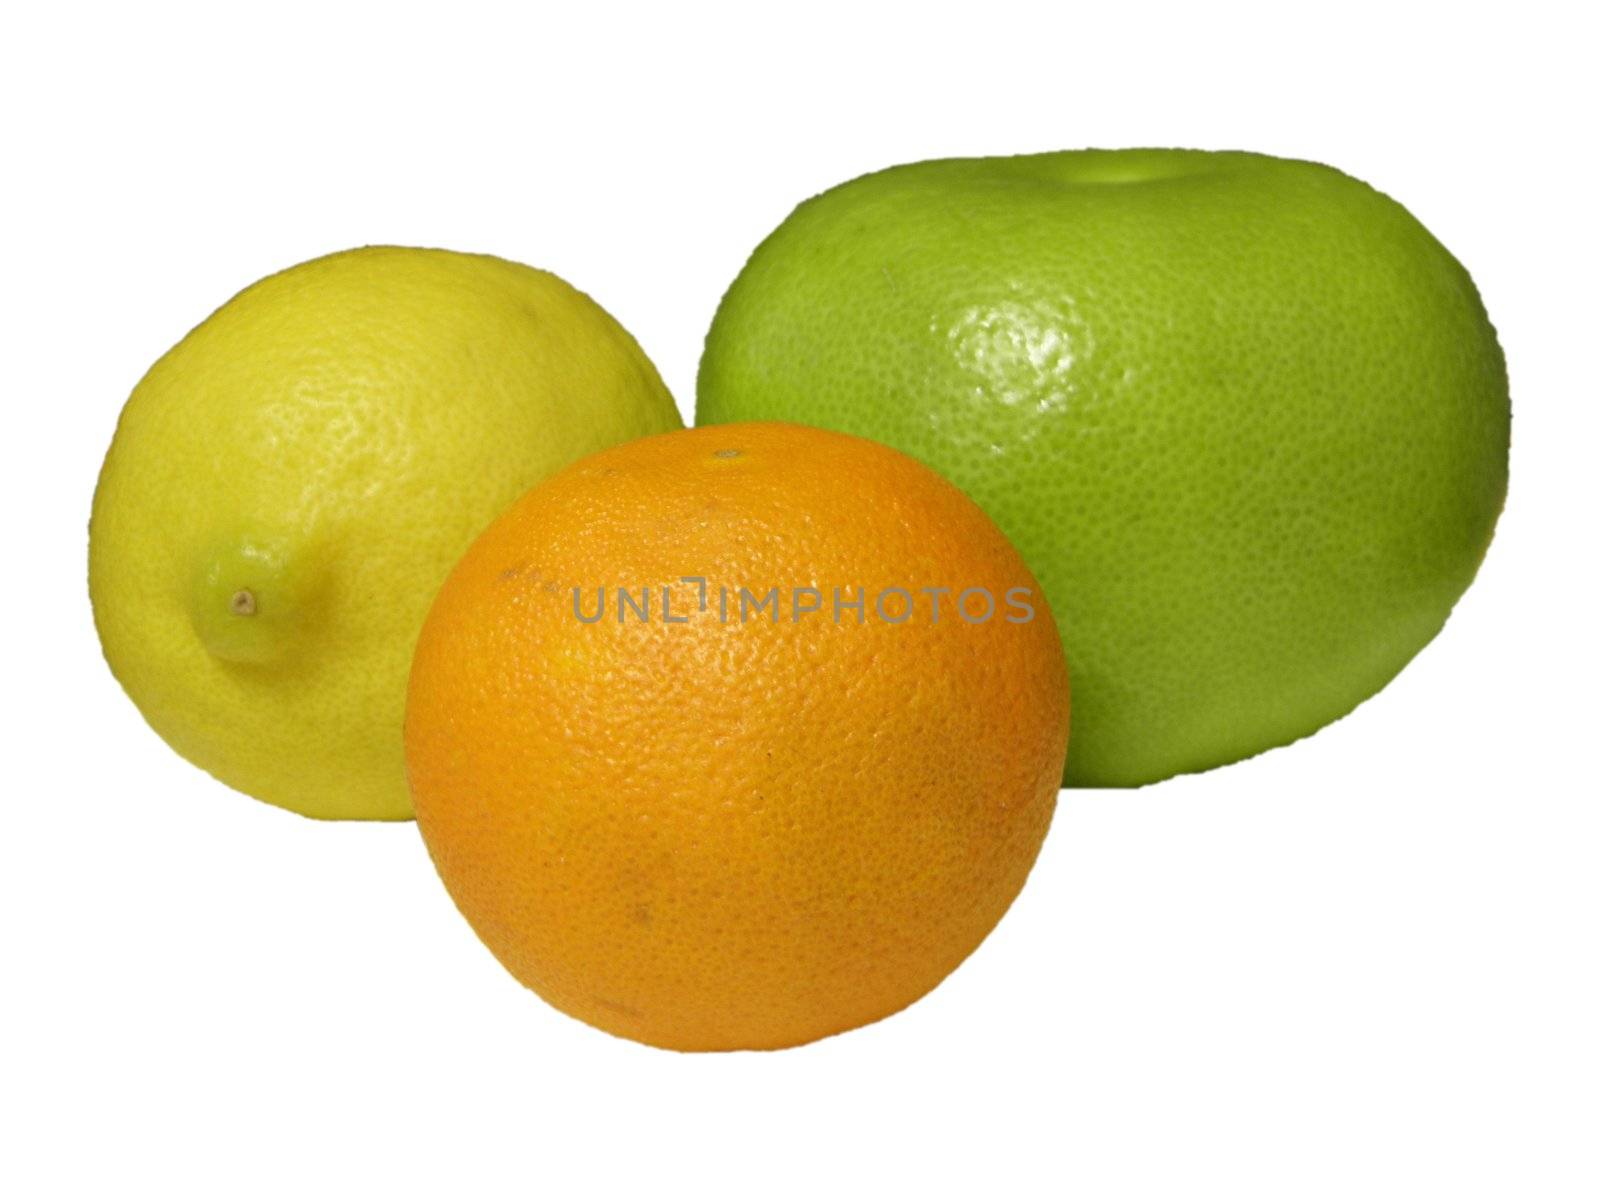 Photo of a different citric. Provided free object.